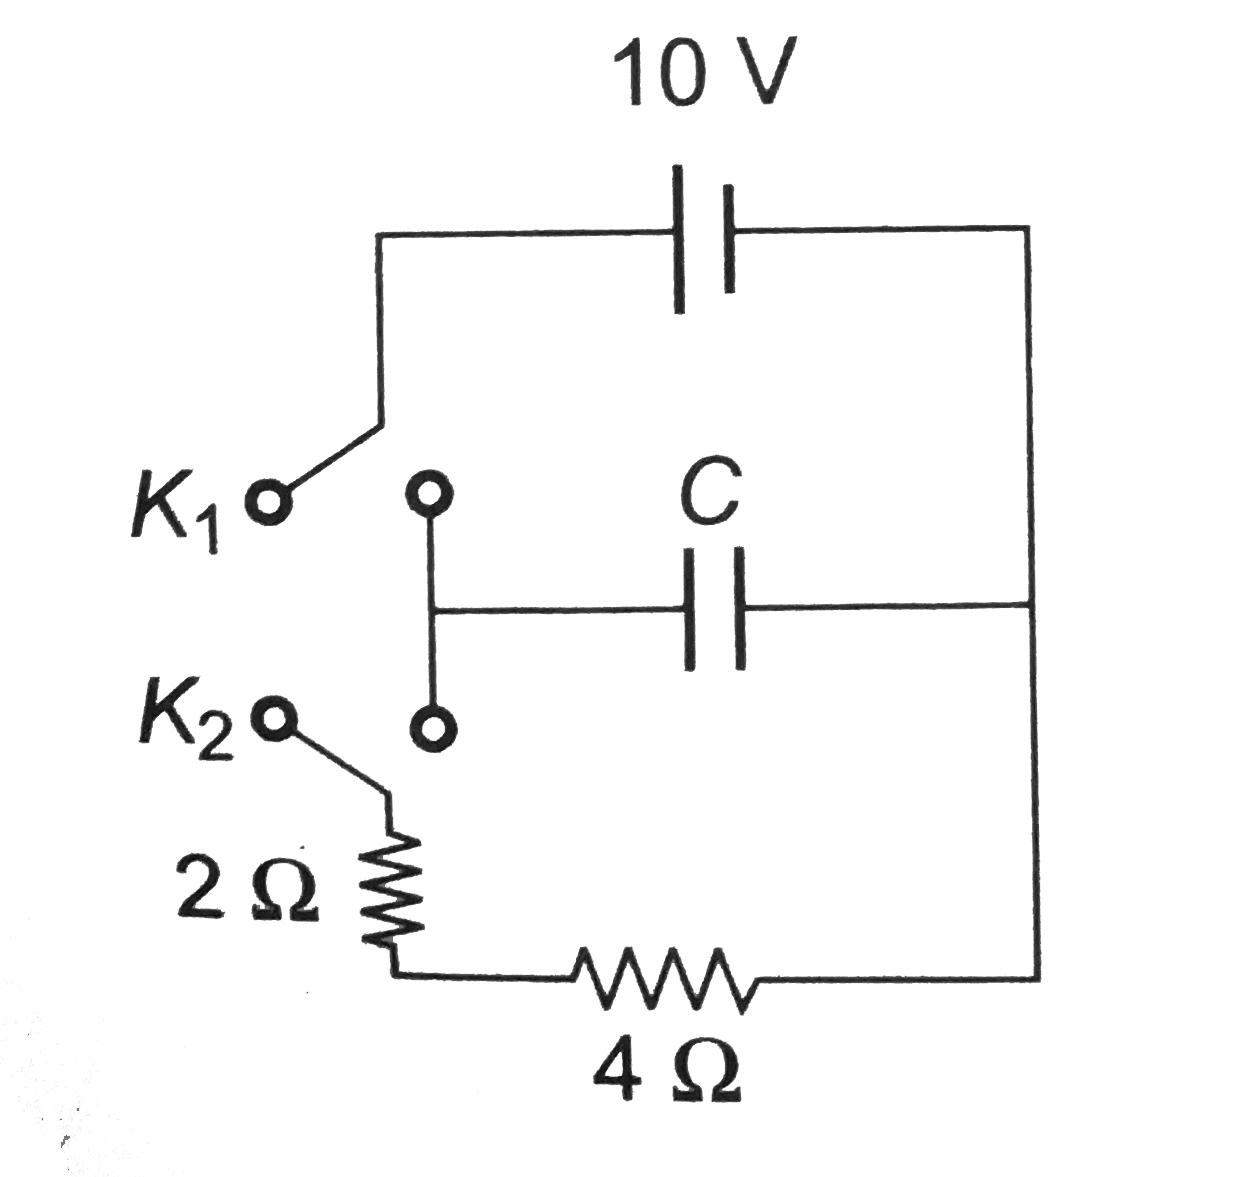 A capacitor of capacitance 3 mu F is first charged by connecting it across a 10 V battery by closing key K(1), then it is allowed to get discharged through 2 Omega and  4 Omega resistors by opening K(1) and closing the key K(2). The total energy dissipated in the 2 Omega resistor is equal to